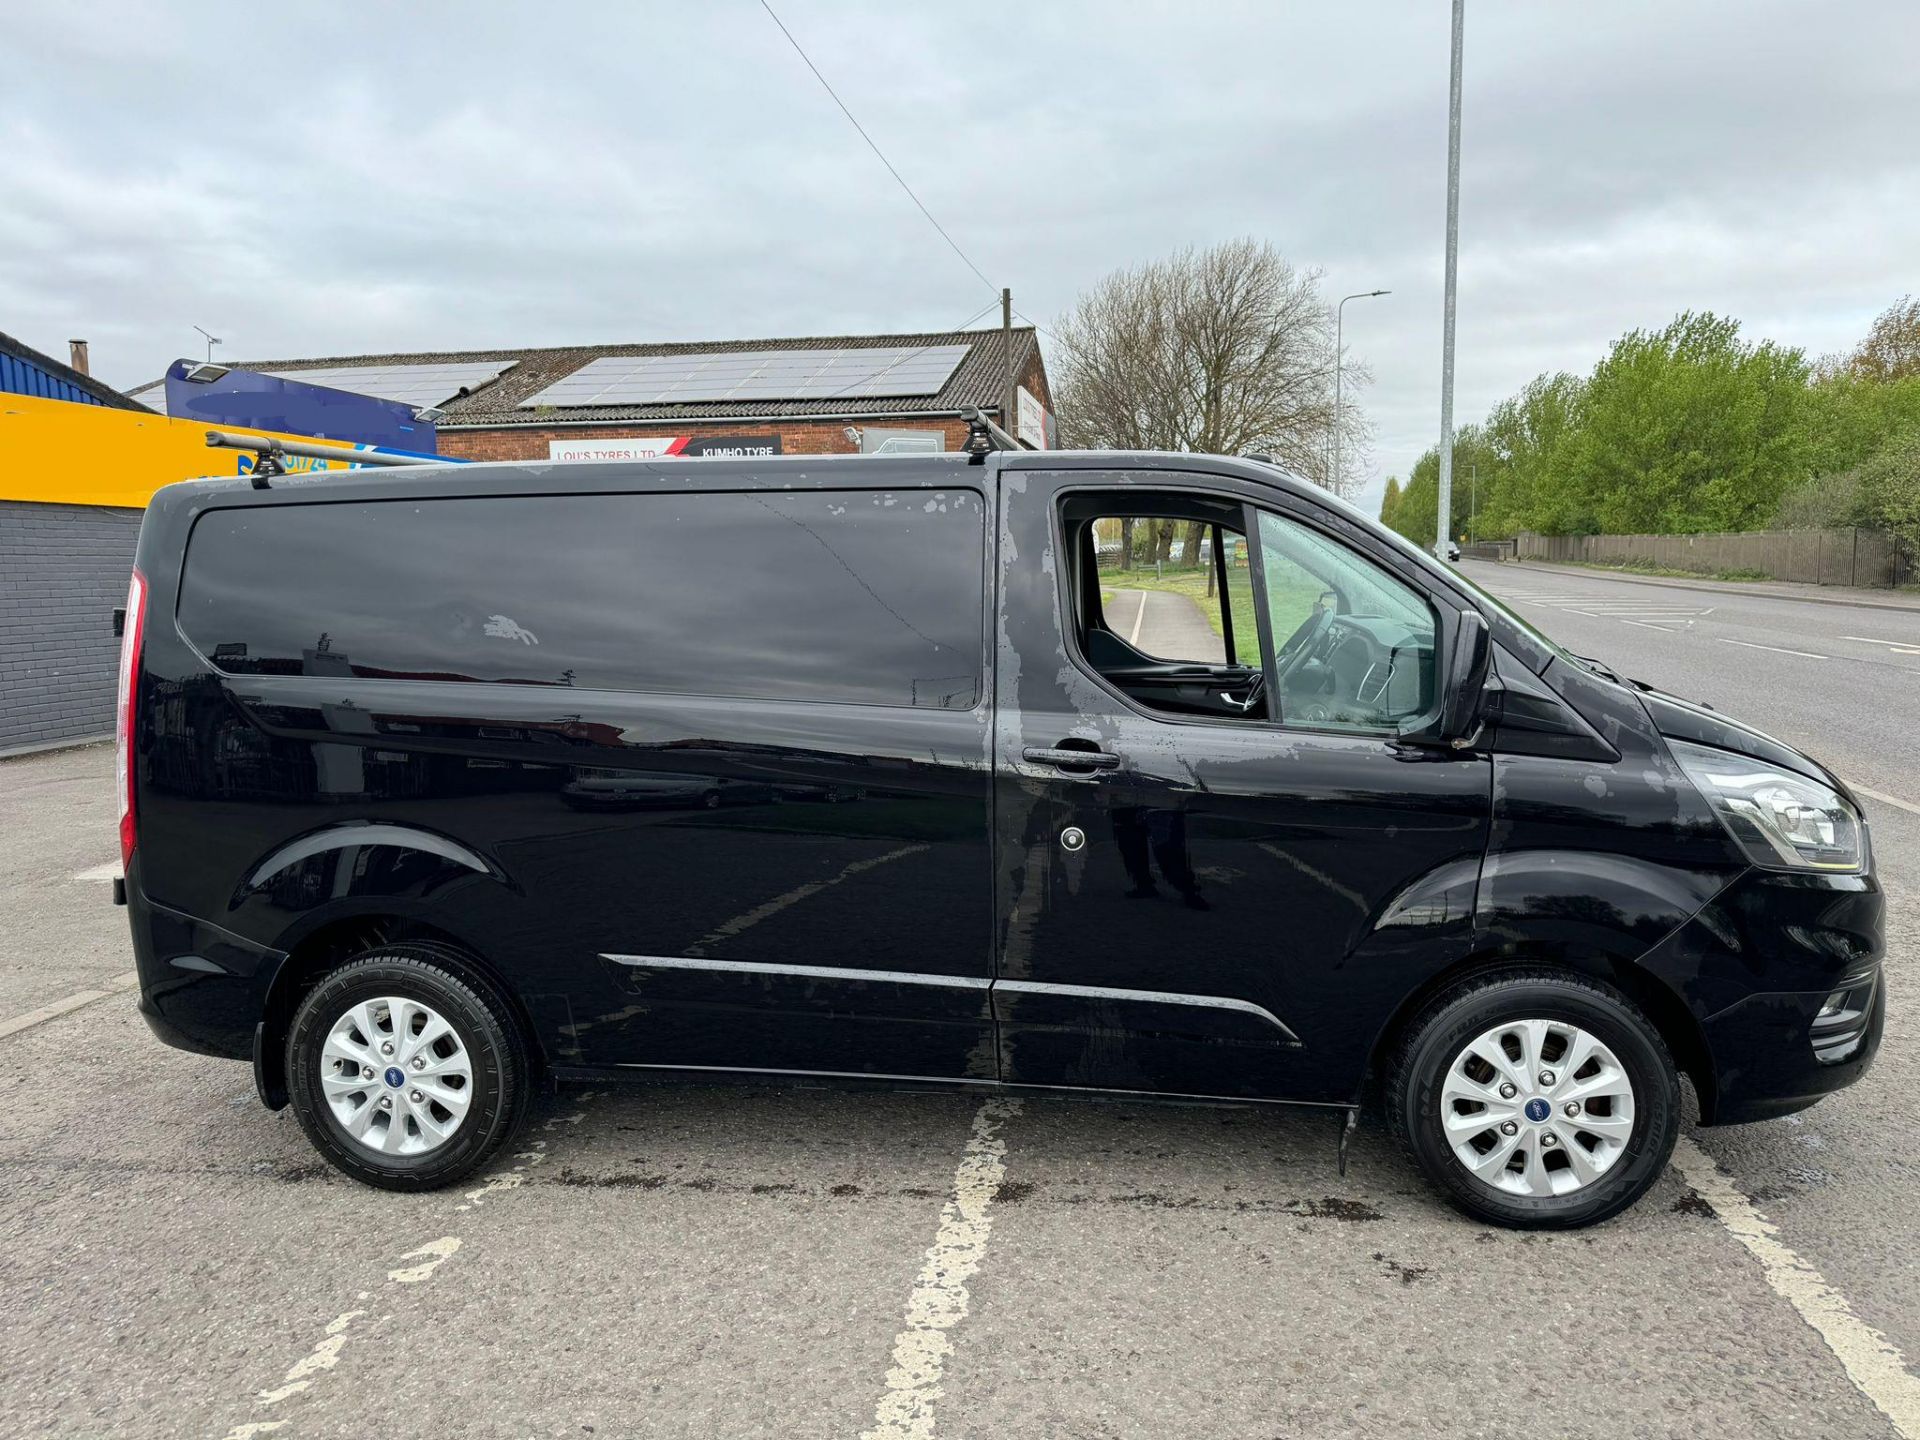 2018 68 FORD TRANSIT CUSTOM LIMITED PANEL VAN - 114K MILES - EURO 6 - AIR CON -  ALLOY WHEELS  - Image 9 of 12